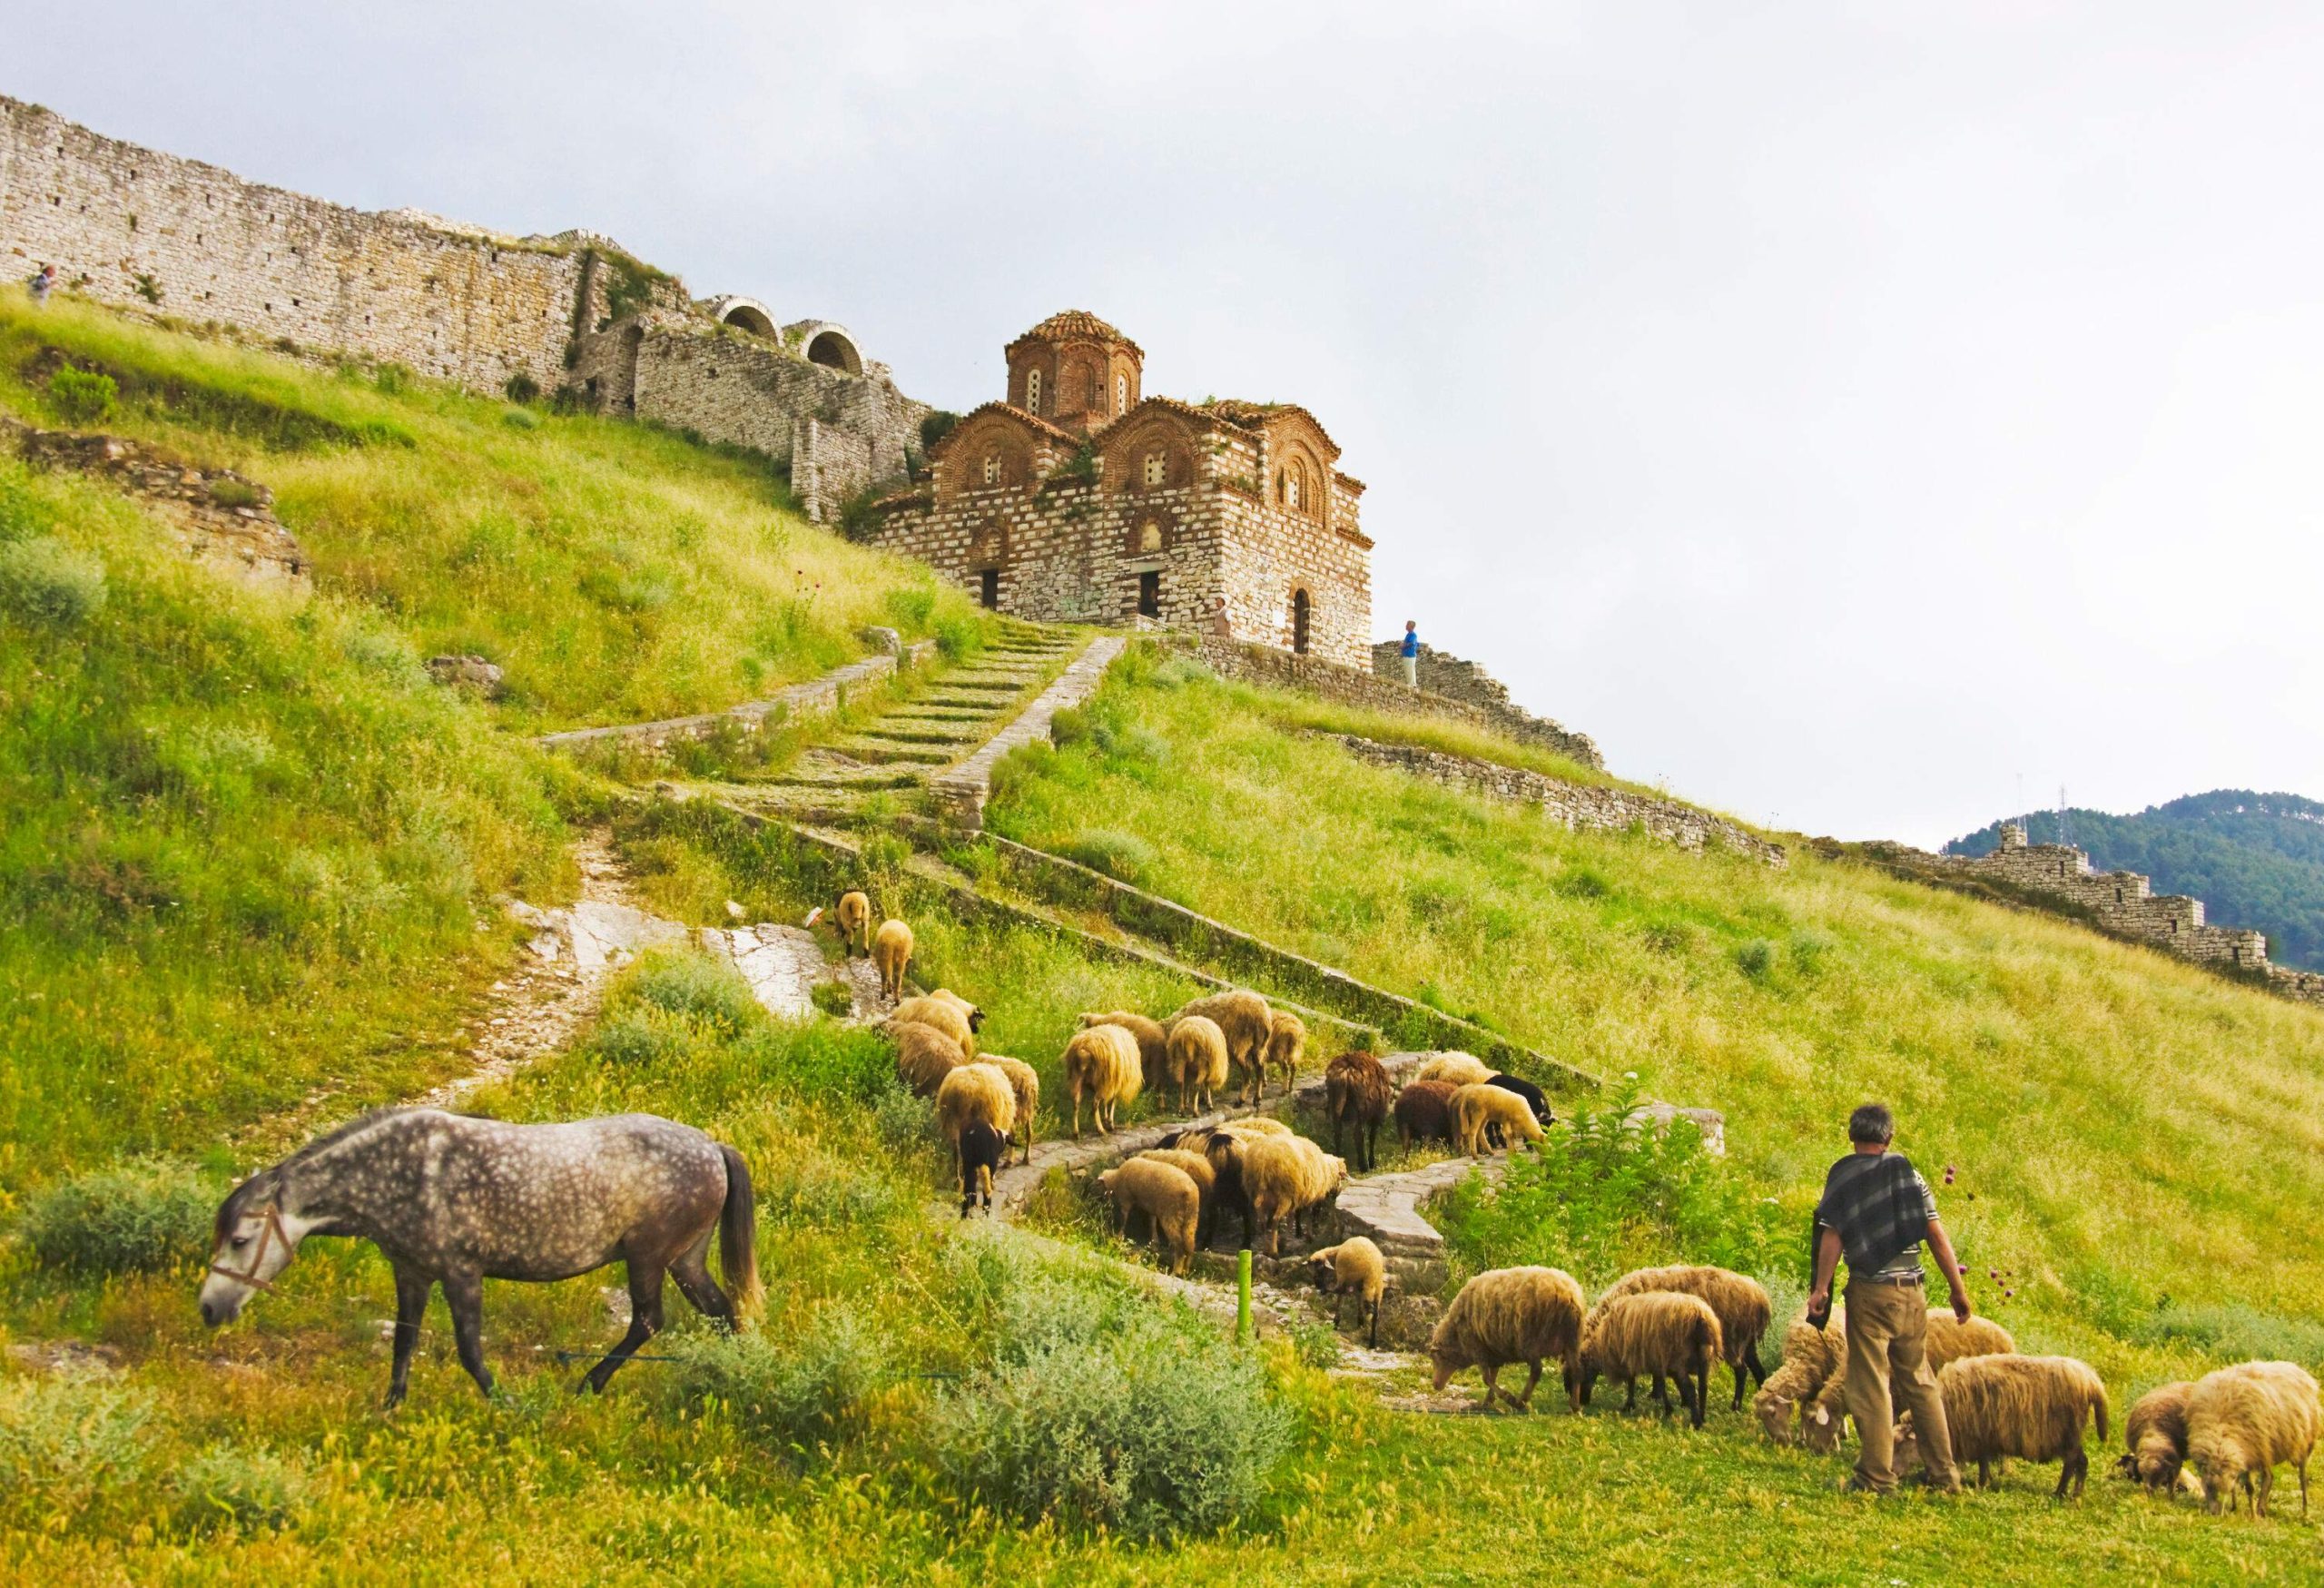 A shepherd watching over a flock of sheep grazing on grassy hills with a staircase towards a hilltop church.